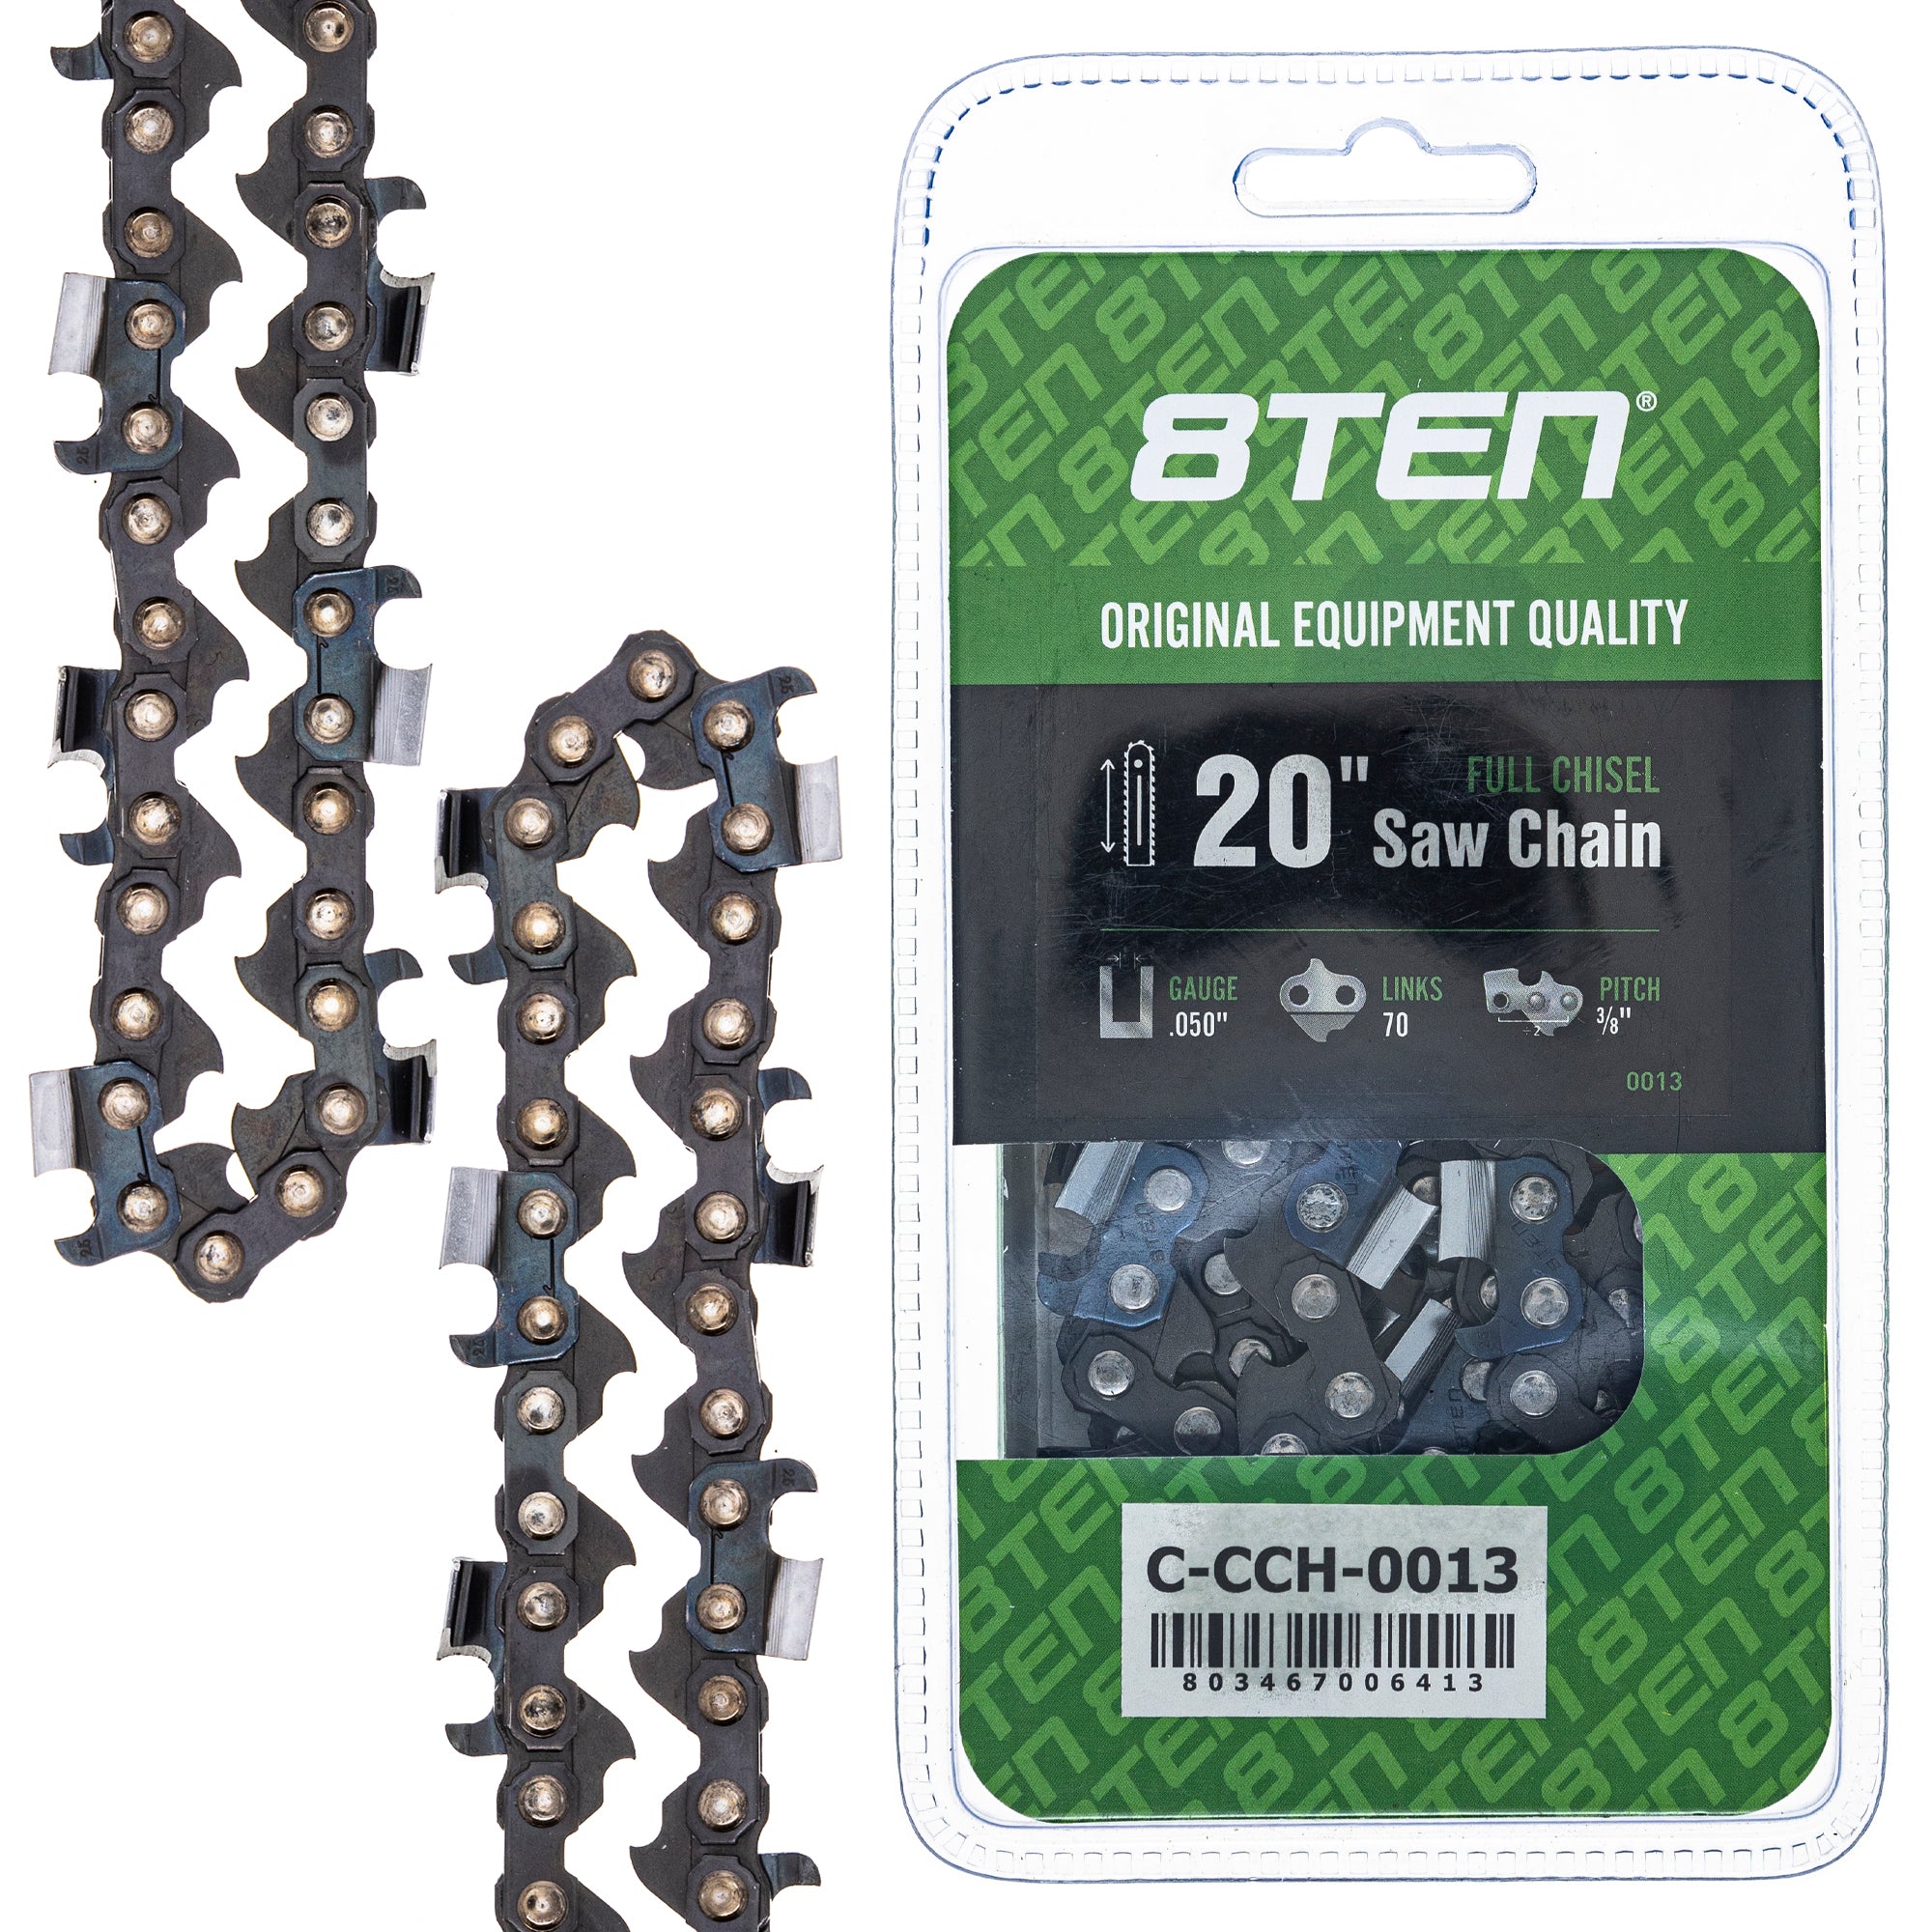 8TEN 810-CCC2235H Chain 3-Pack for zOTHER Stens Oregon GB Carlton